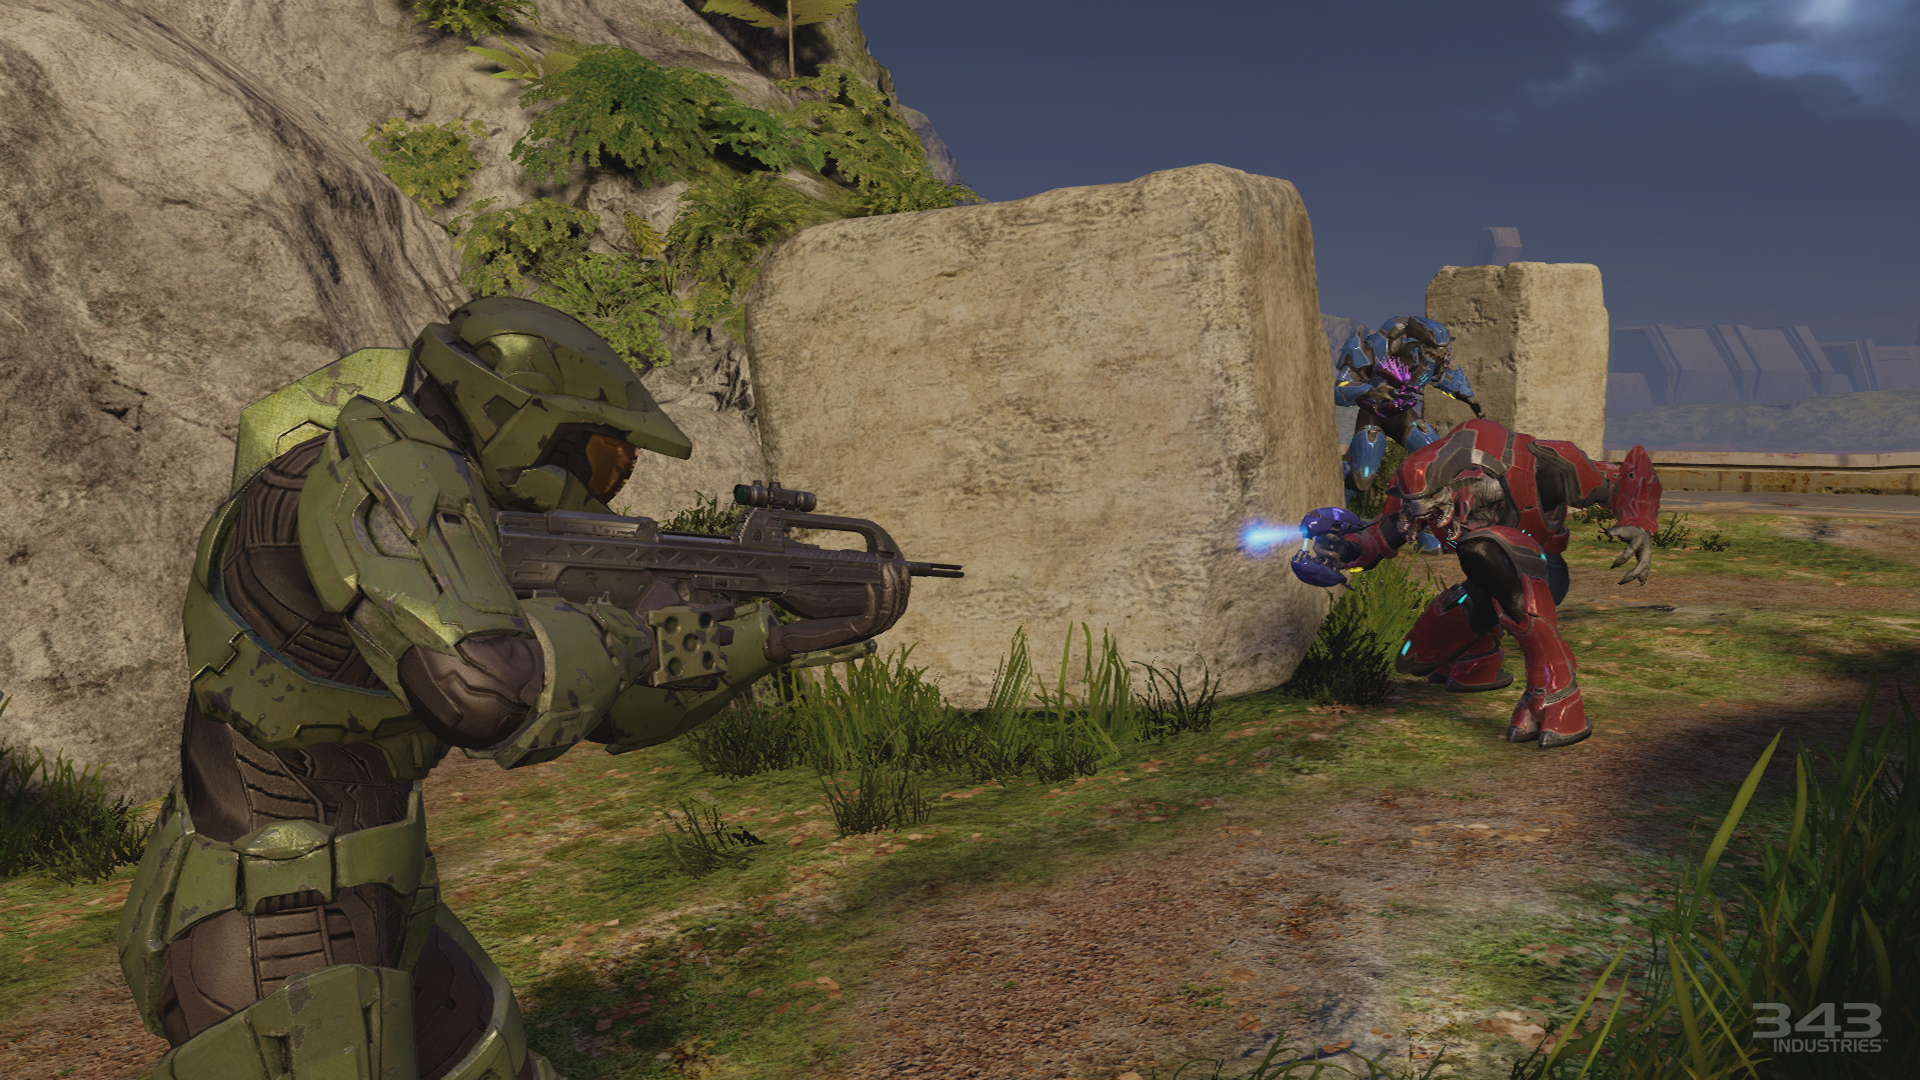 Halo: The Master Chief Collection – Xbox One review